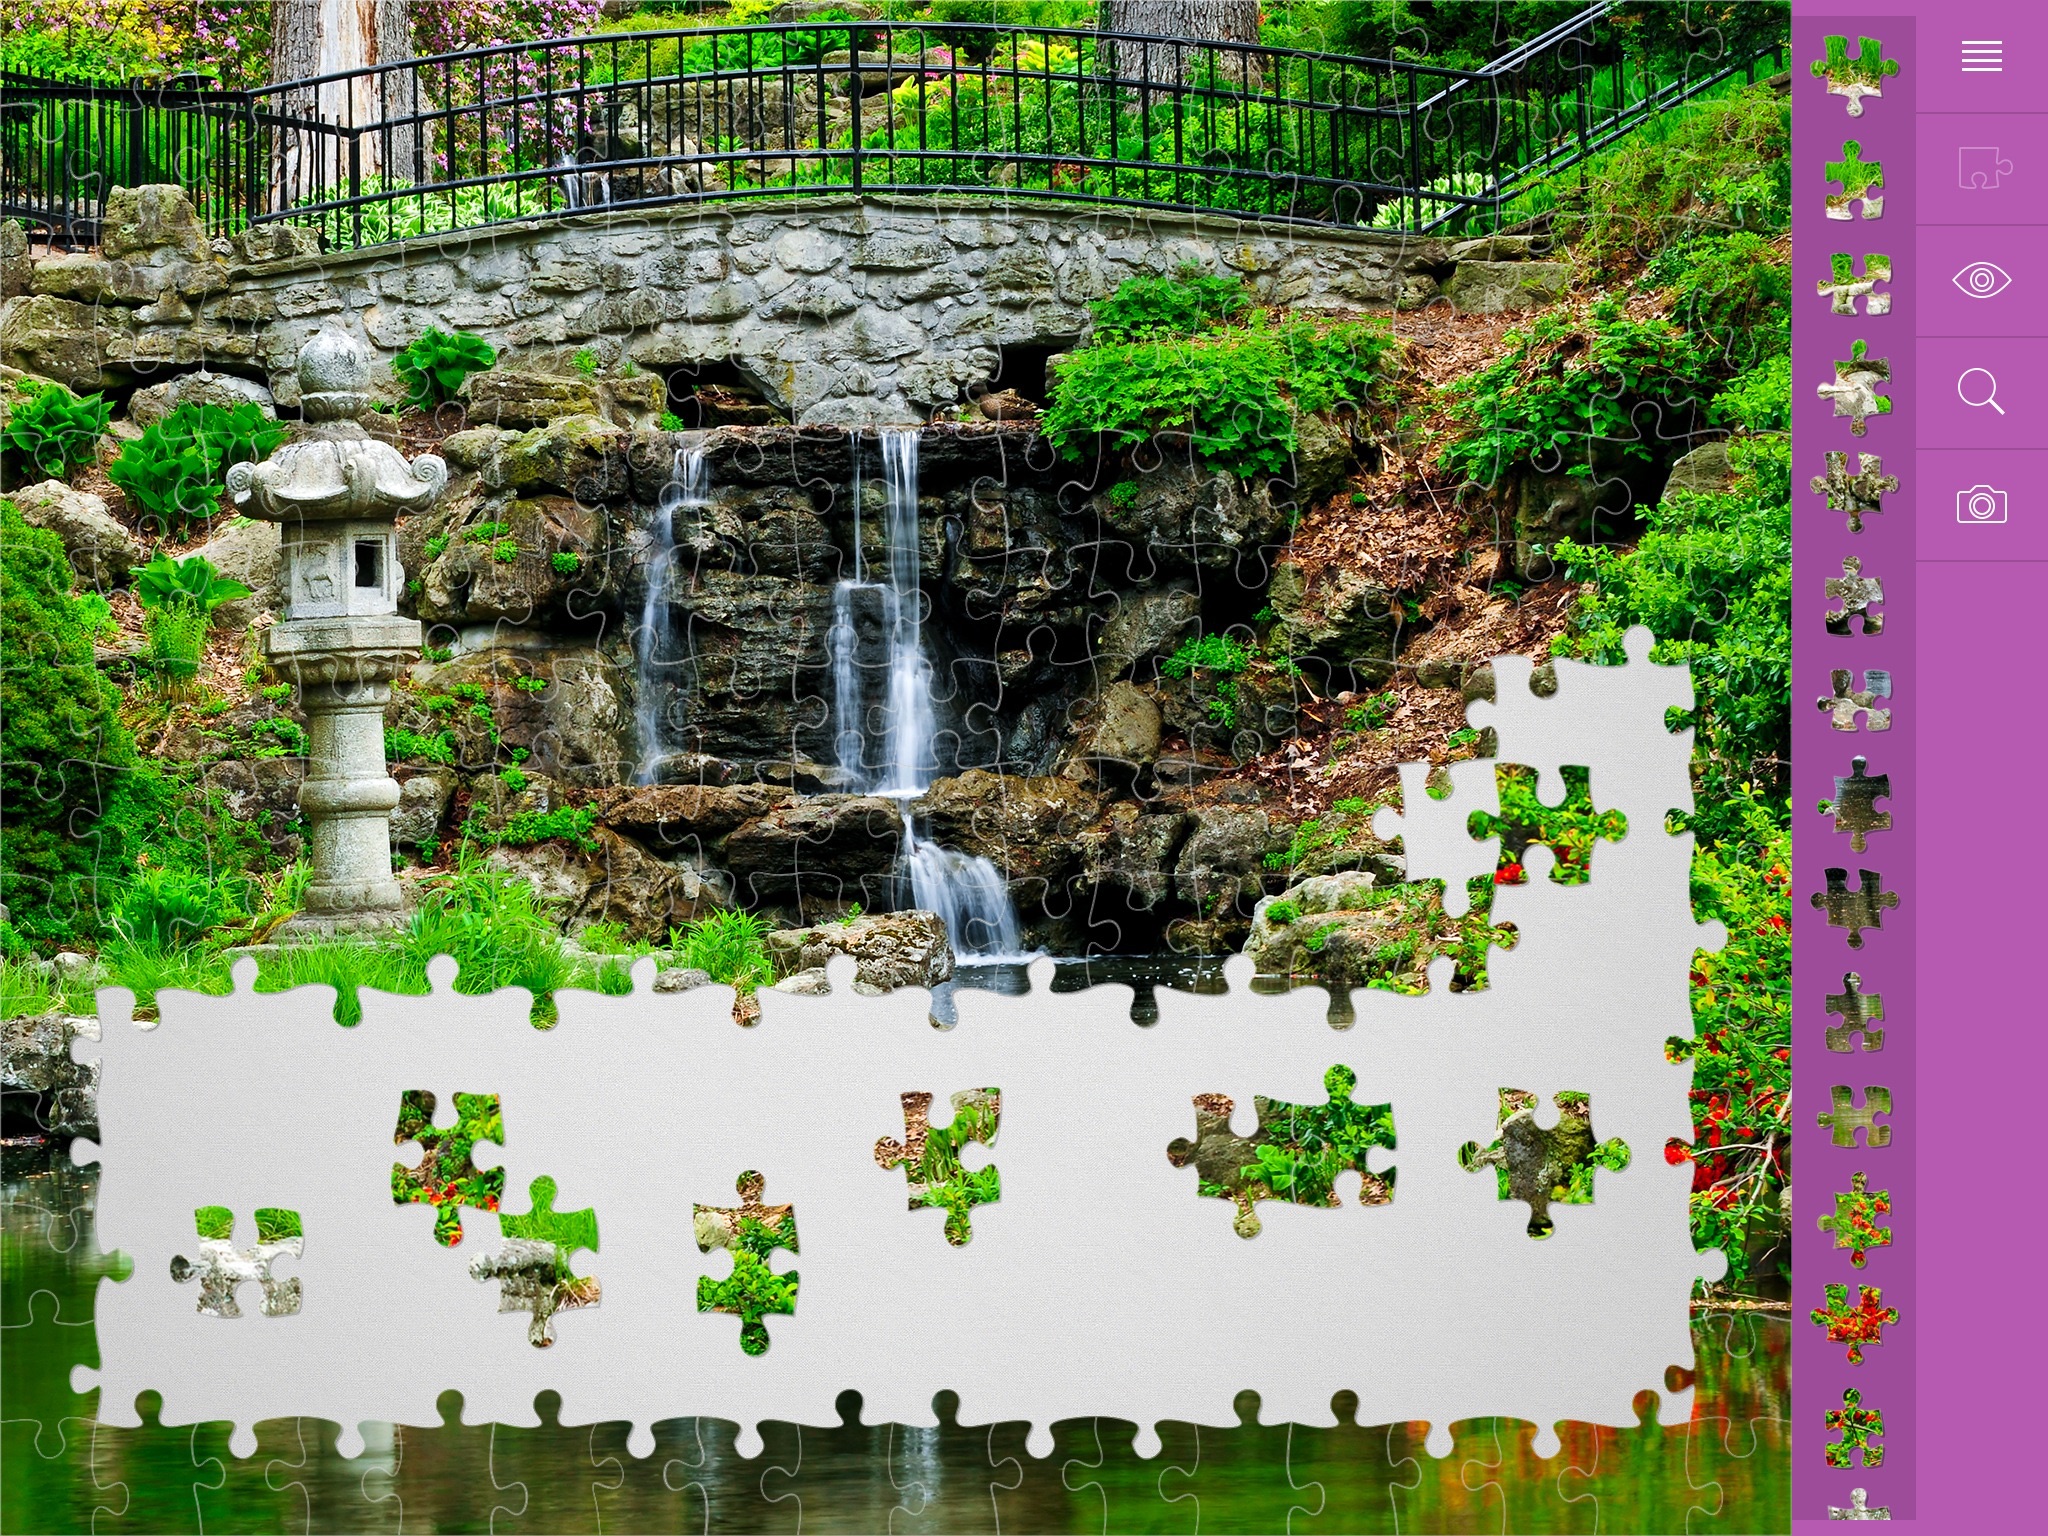 1000 Jigsaw Puzzles Places screenshot 4